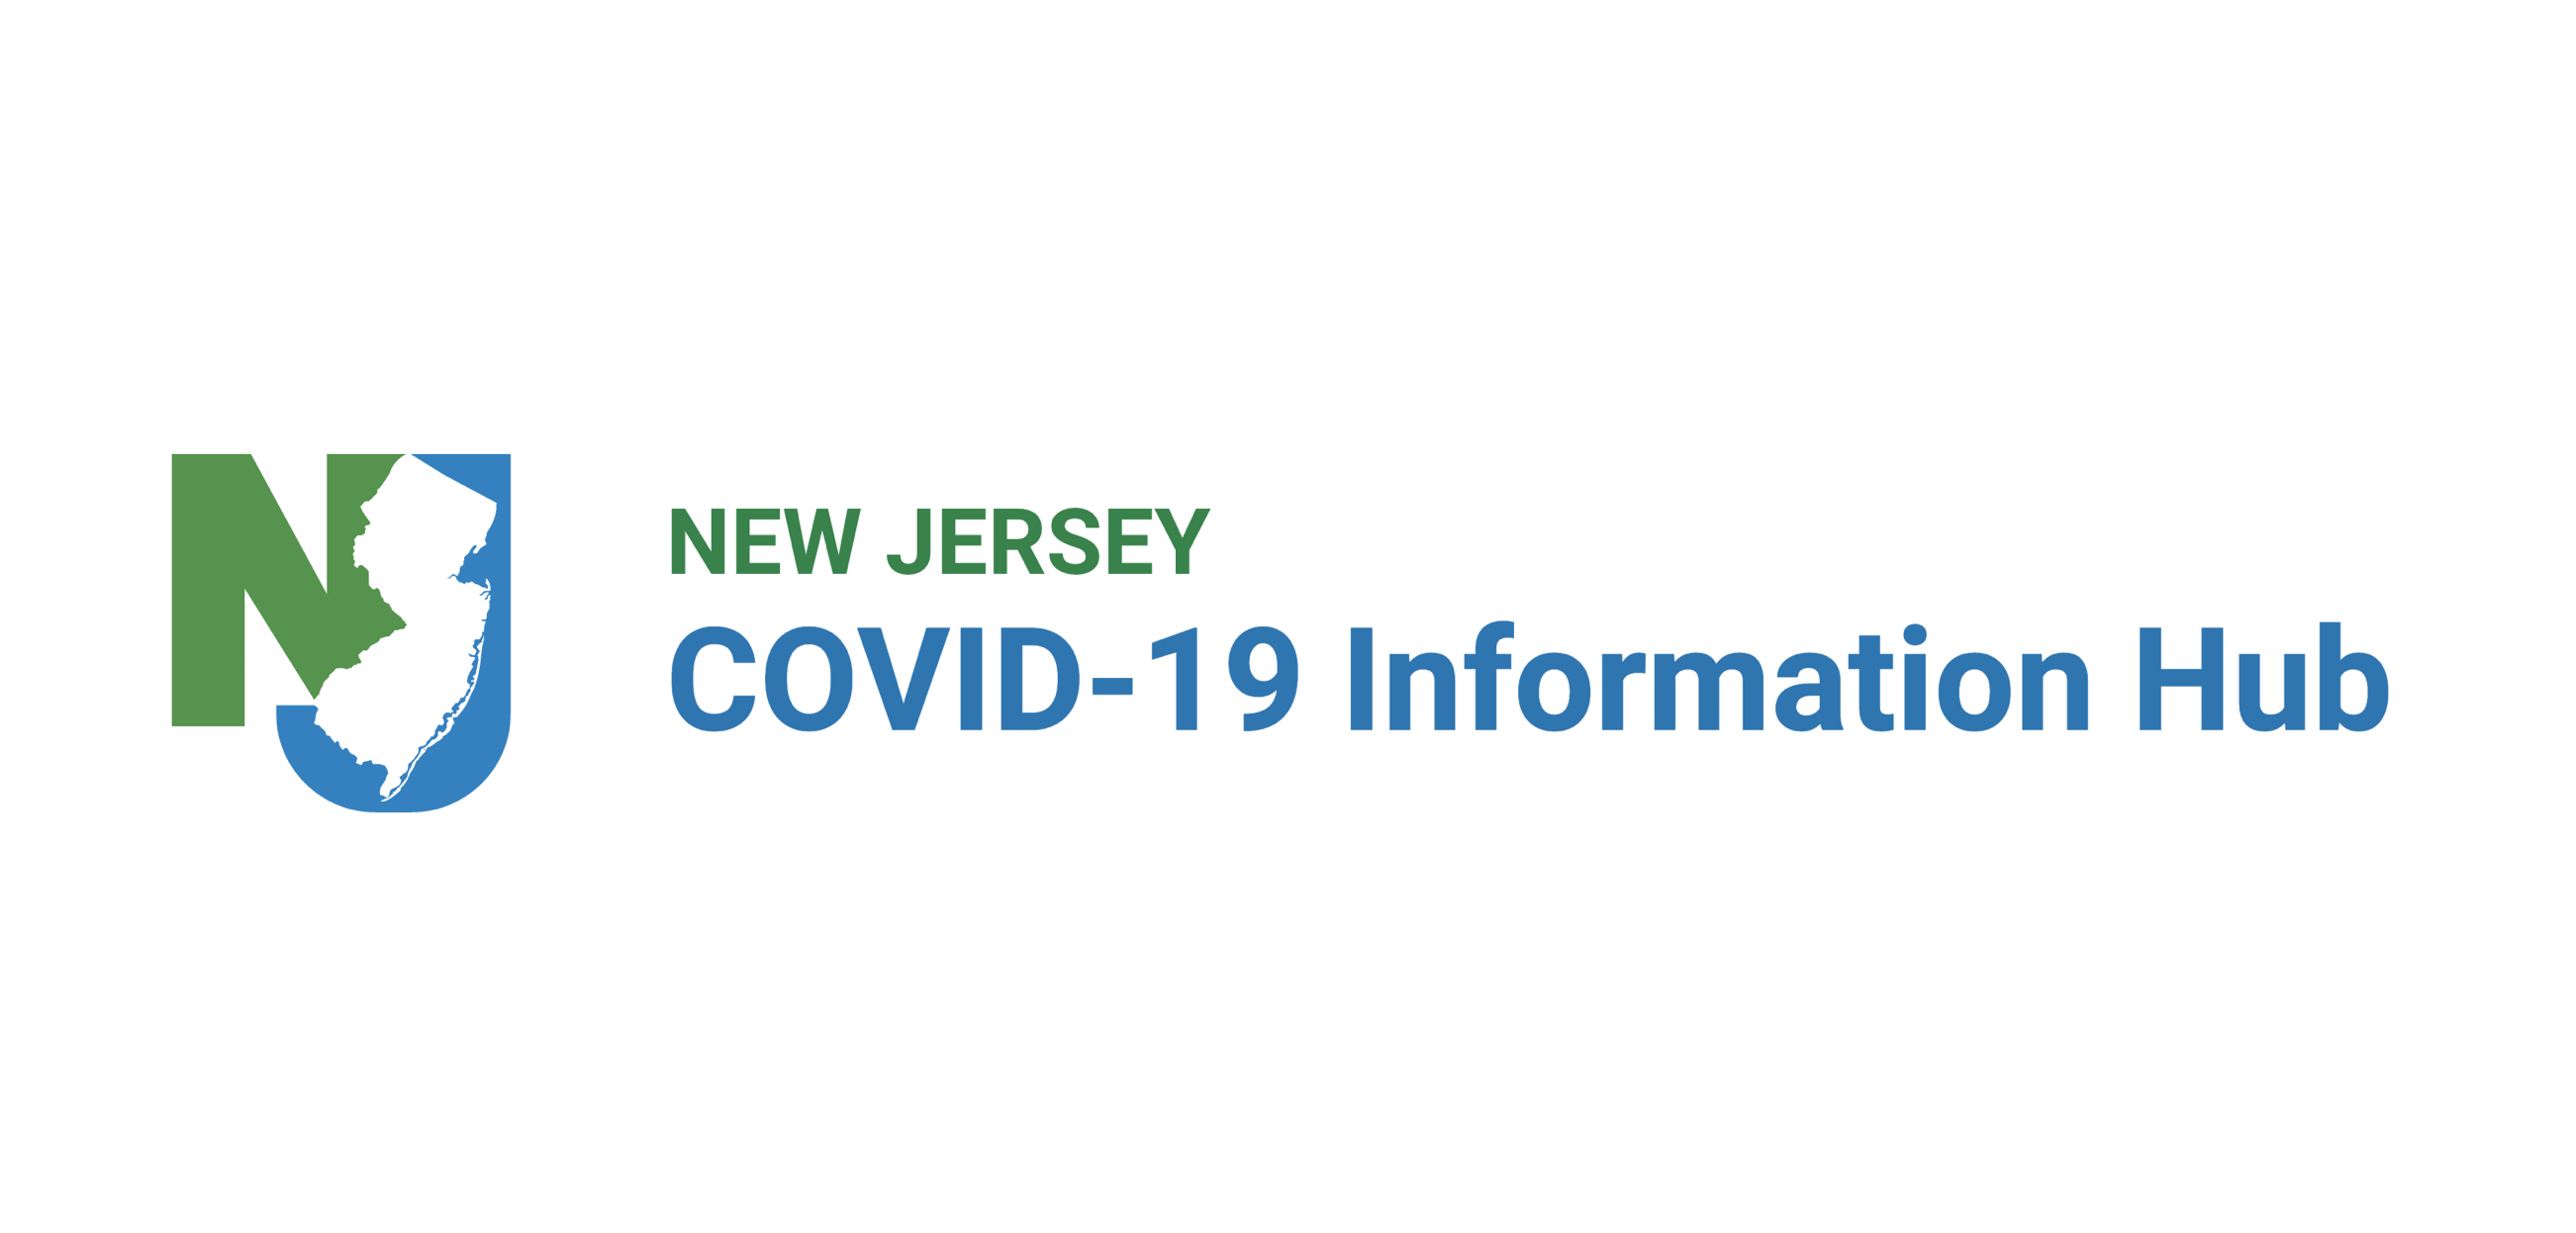 How can I get testing or treatment for COVID-19 if I'm uninsured or undocumented? How do I cover health costs associated with COVID-19? | FAQ